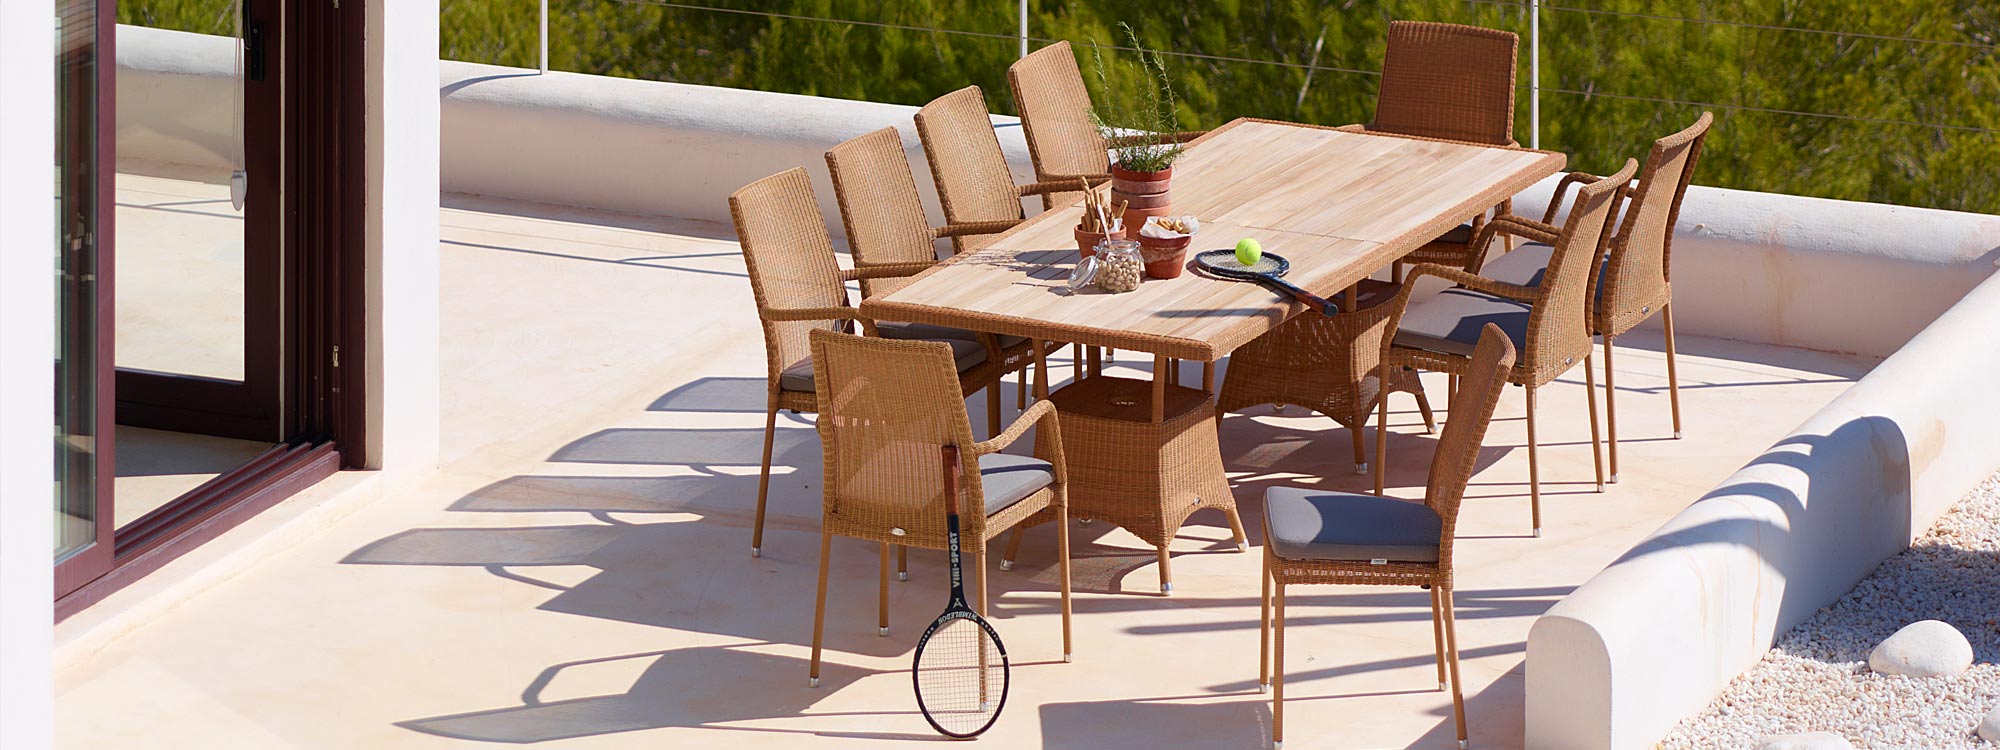 Image of Caneline Newman rattan garden chairs in natural weave with taupe cushions